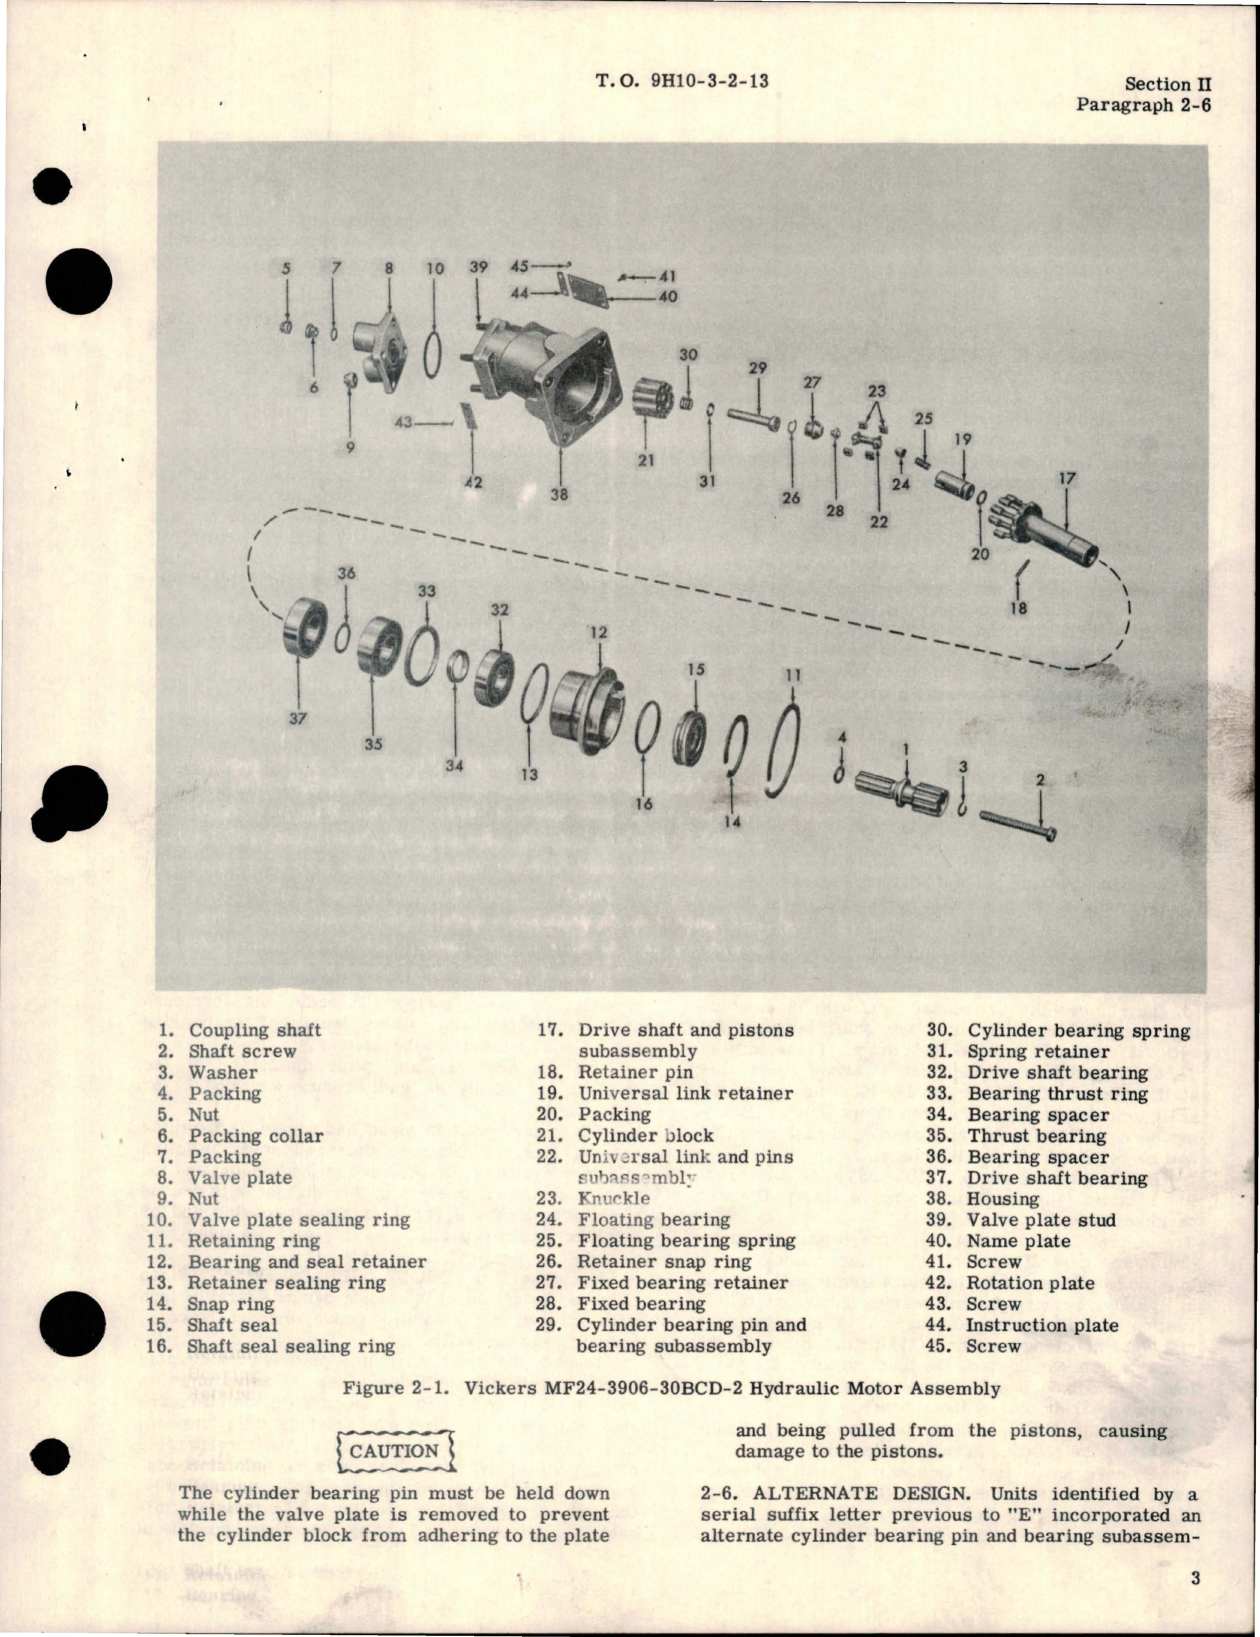 Sample page 7 from AirCorps Library document: Overhaul Instructions for Hydraulic Motor Assemblies - MF-3906-2